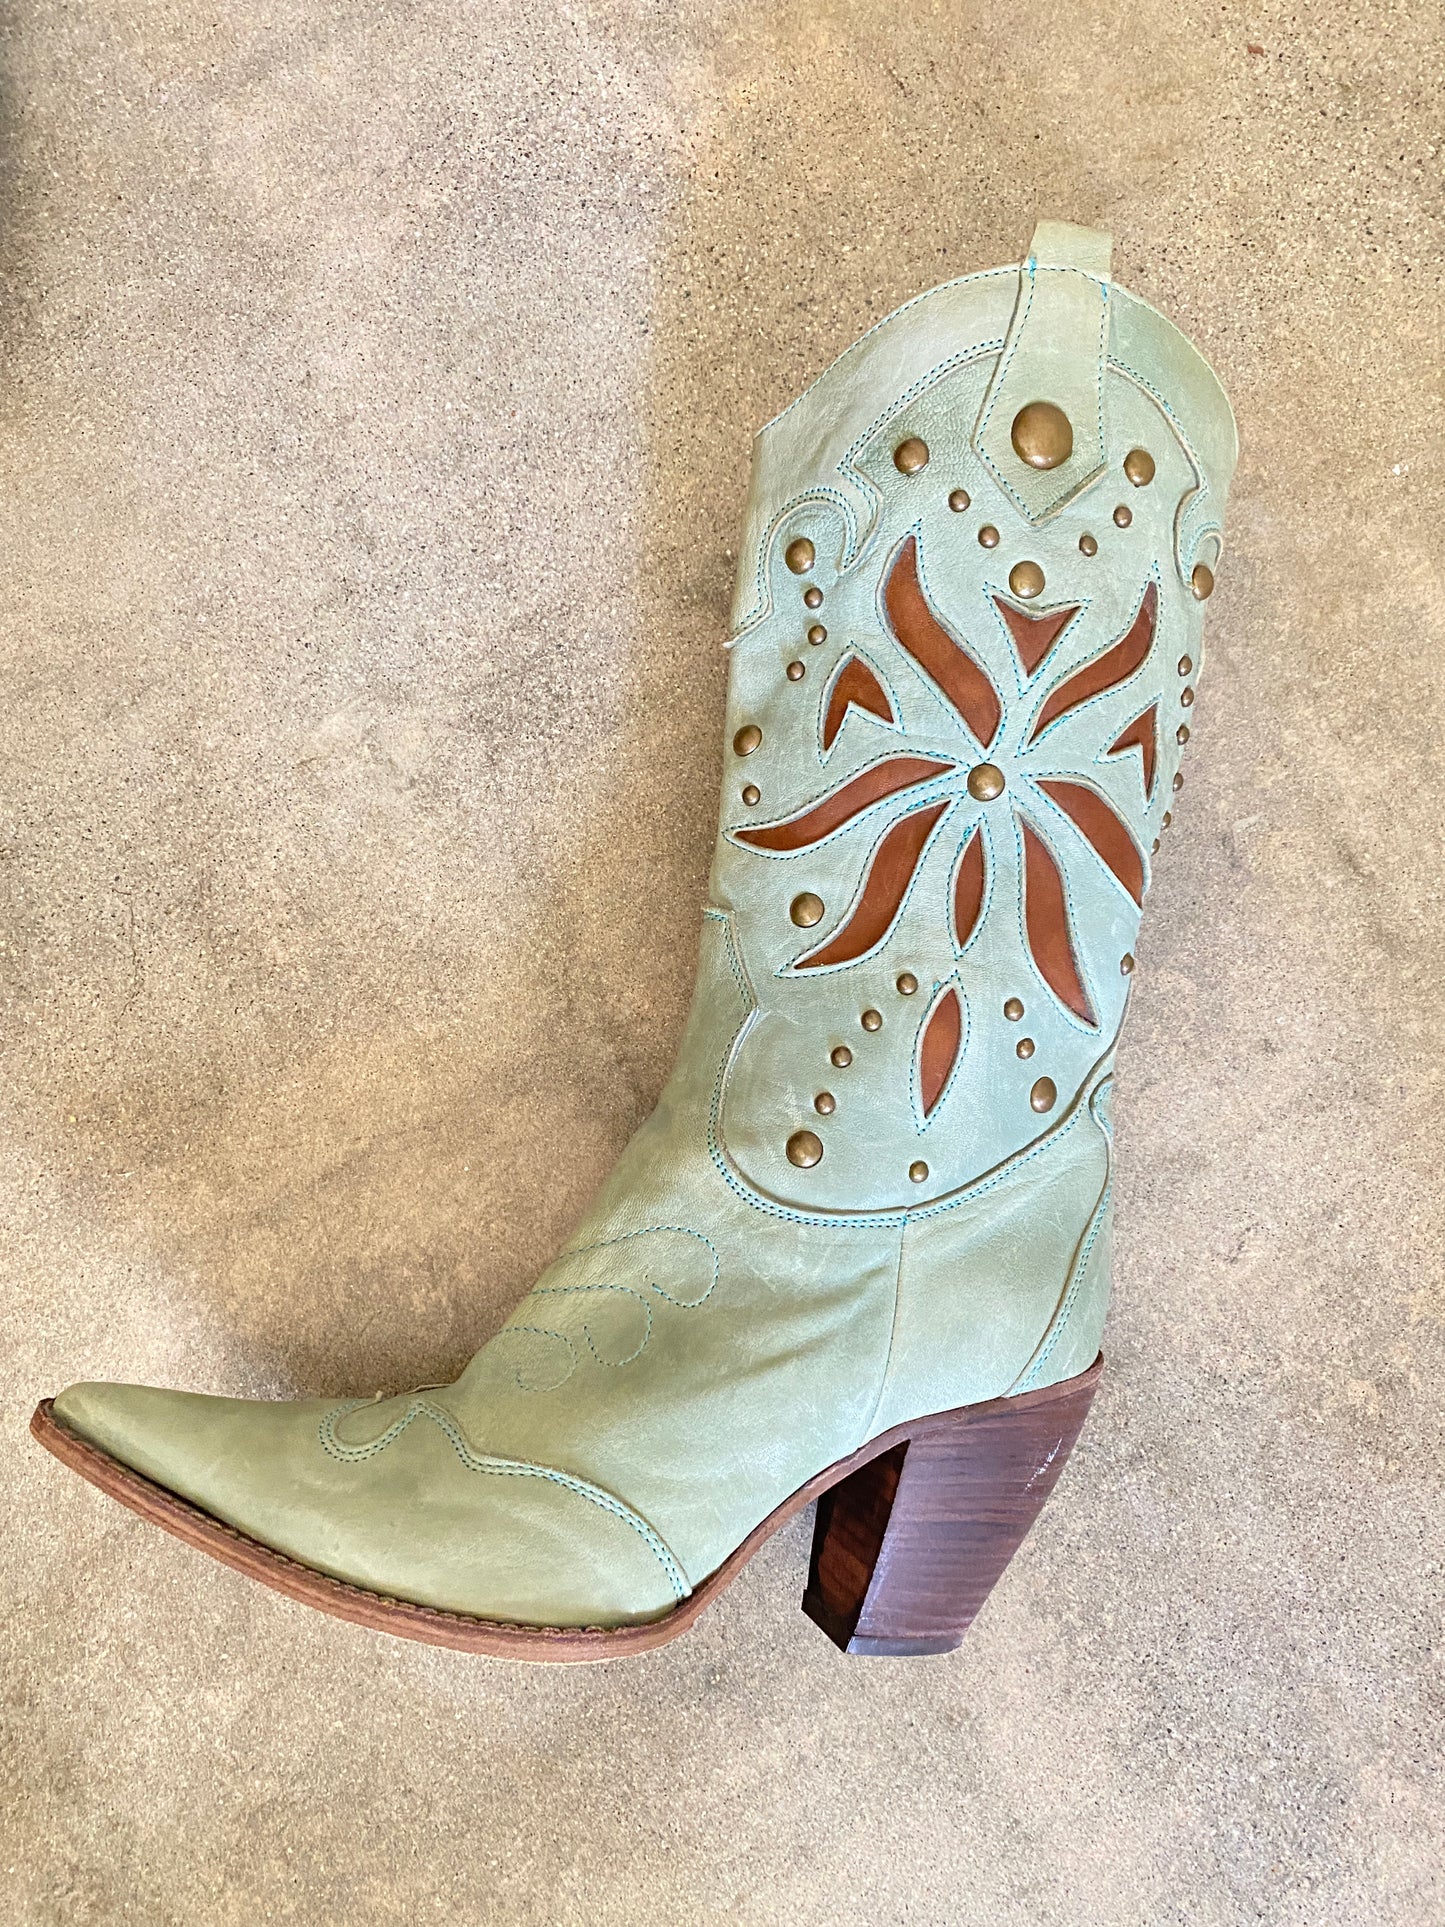 00's Italian Pointed Toe Cowgirl Boots